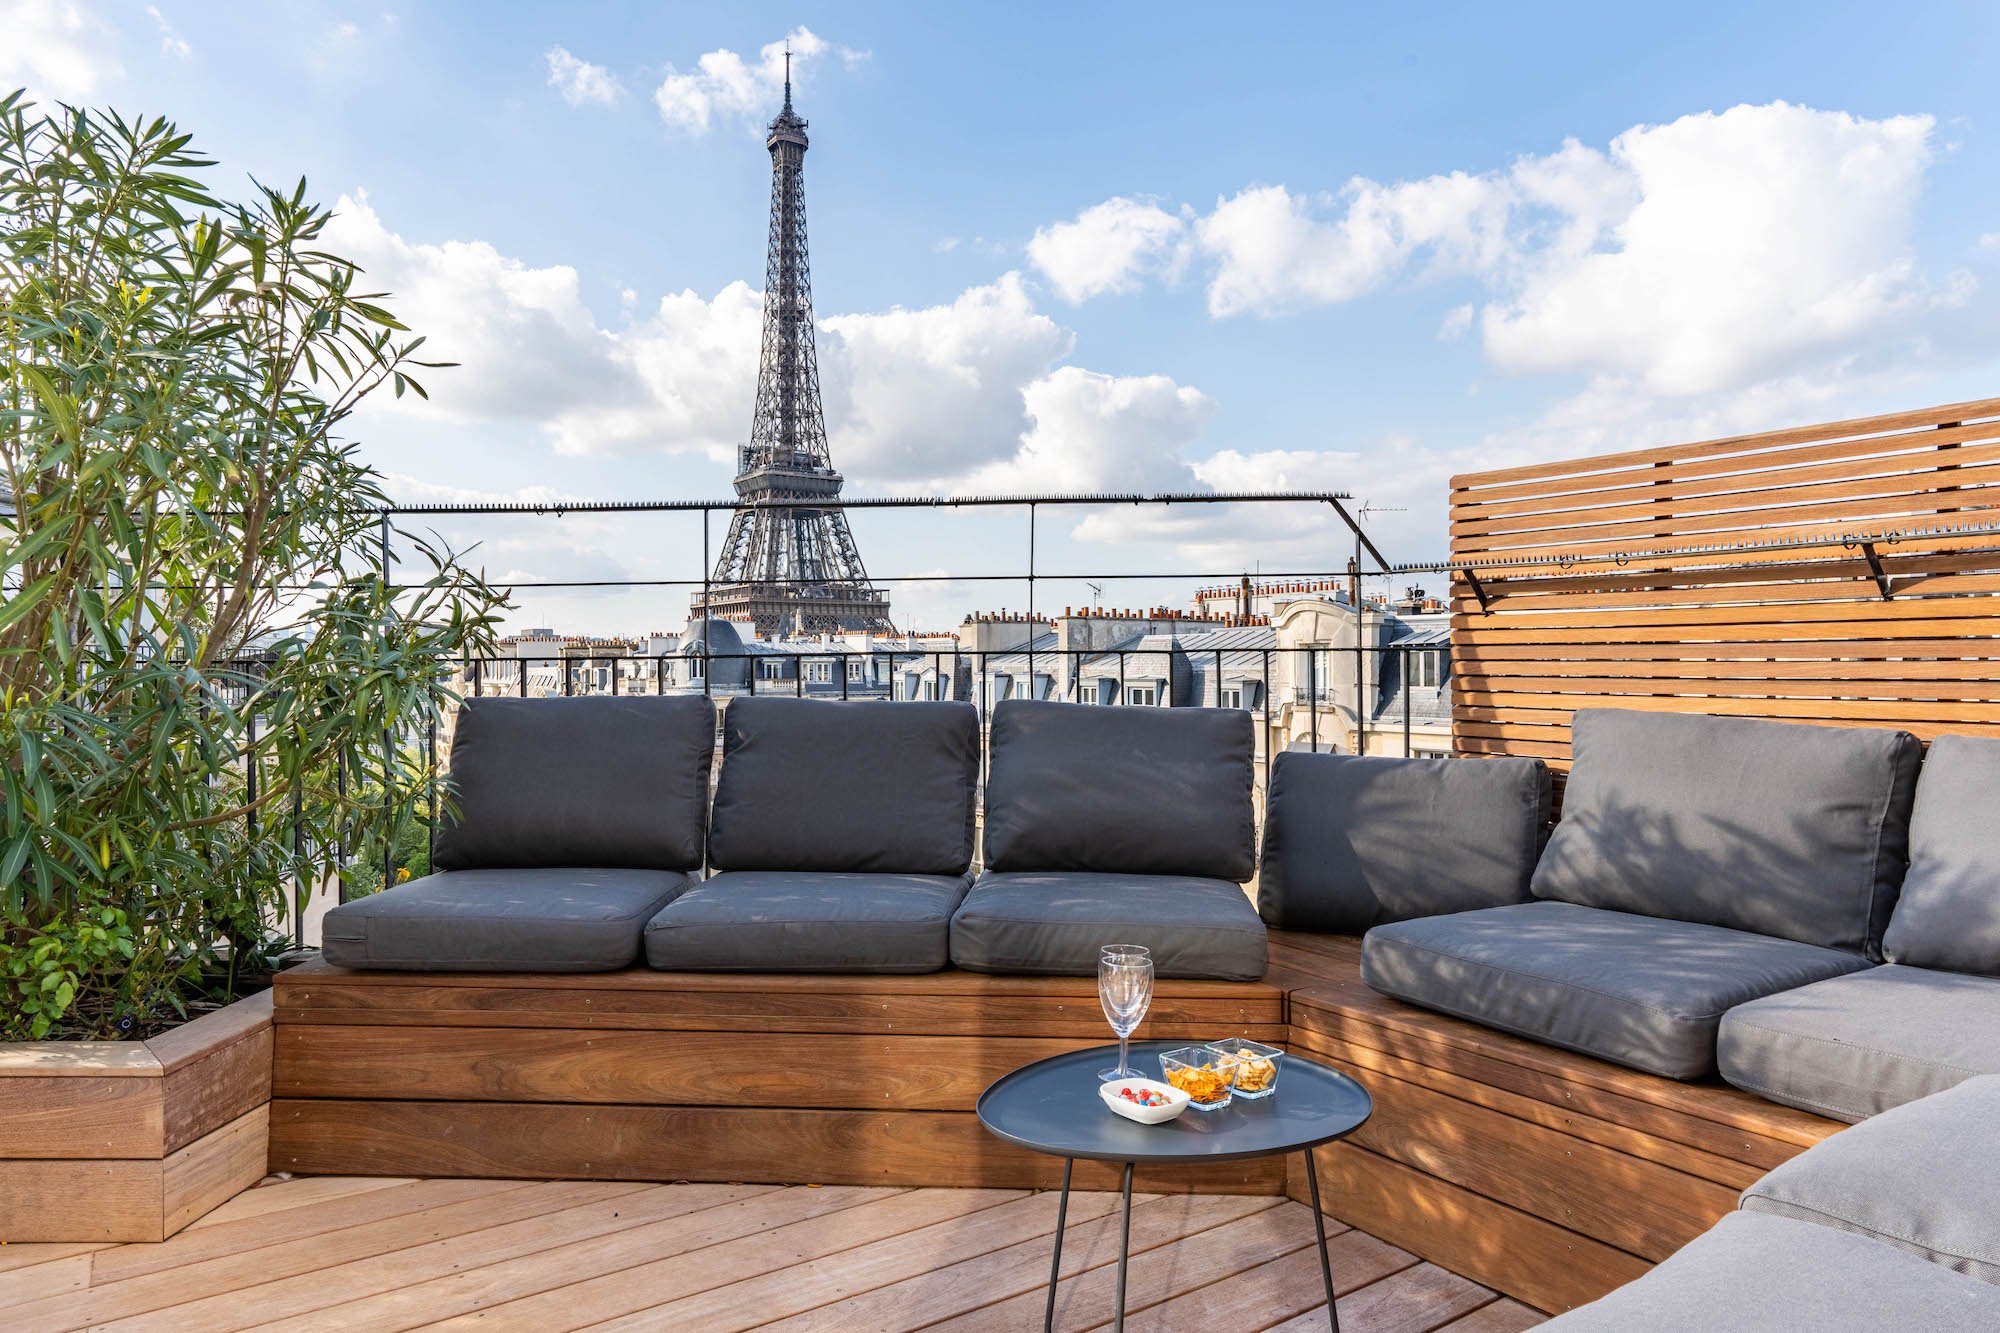 Luxury apartment and roof-top overlooking the Eiffel Tower